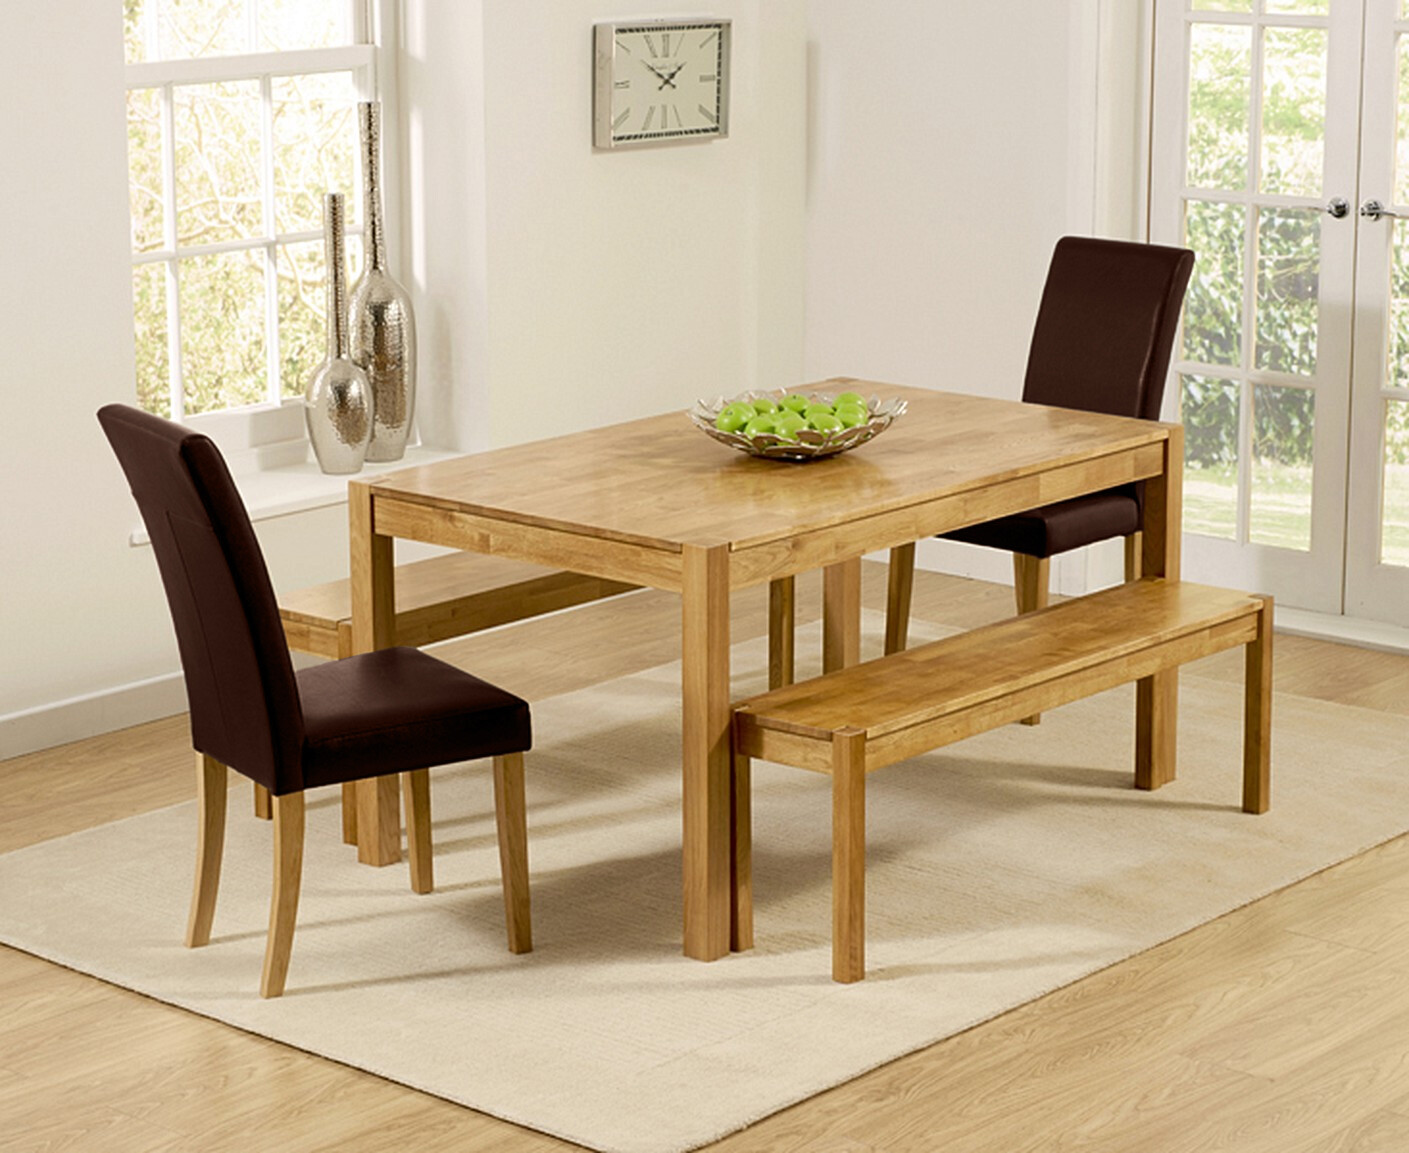 York 150cm Solid Oak Dining Table With 4 Olivia Brown Chairs And 2 York Bencheses